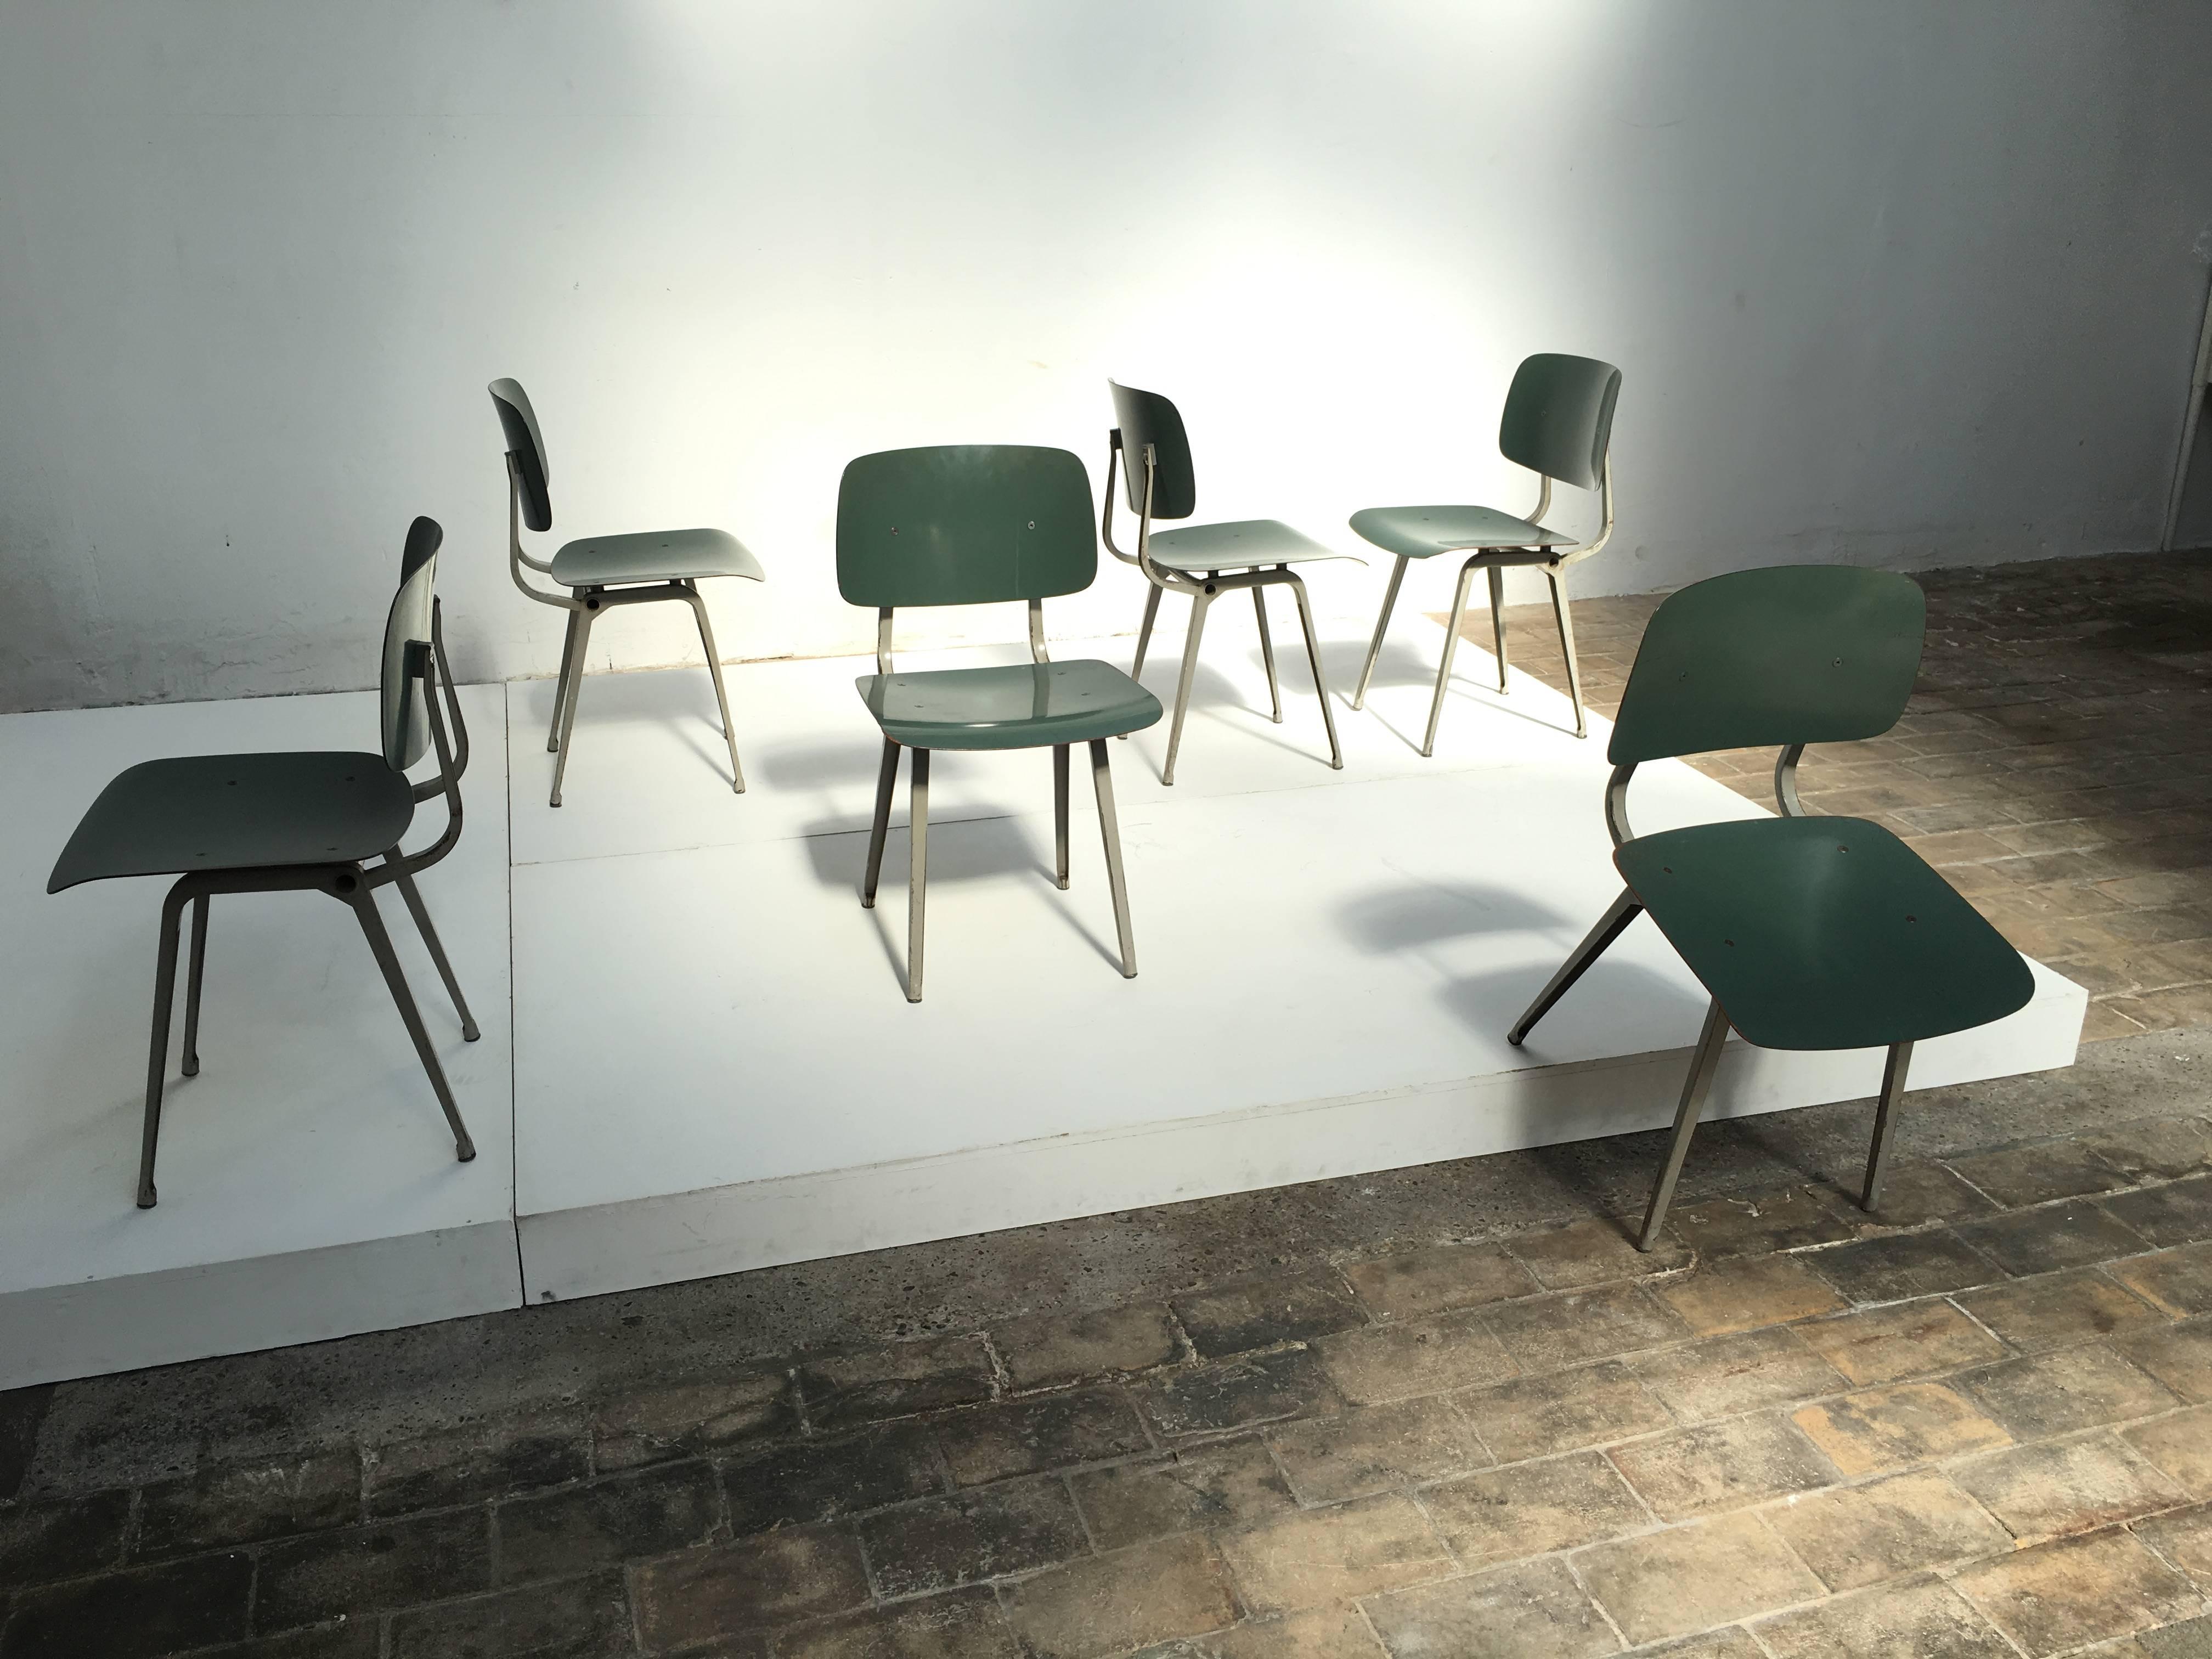 This is a rare set of green ciranol Revolt chairs produced in 1965 by Ahrend de Cirkel.

In 1953 Friso Kramer designed his Revolt chair, inspired by the works of Jean Prouve he came up with this brilliant lightweight chair made out of folded sheet